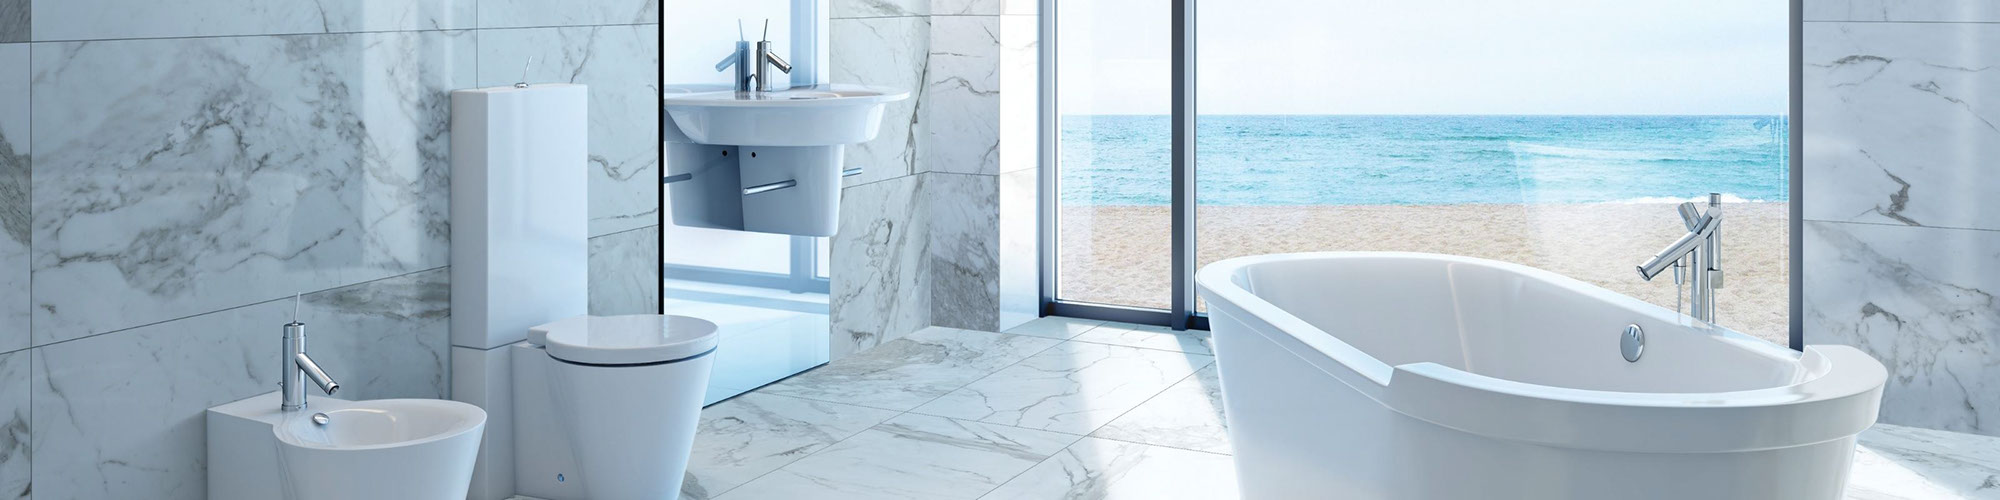 Clean-lined, open bathroom with large windows with an ocean view, soaking tub, and marble-look porcelain large-format tile on the floor and walls.